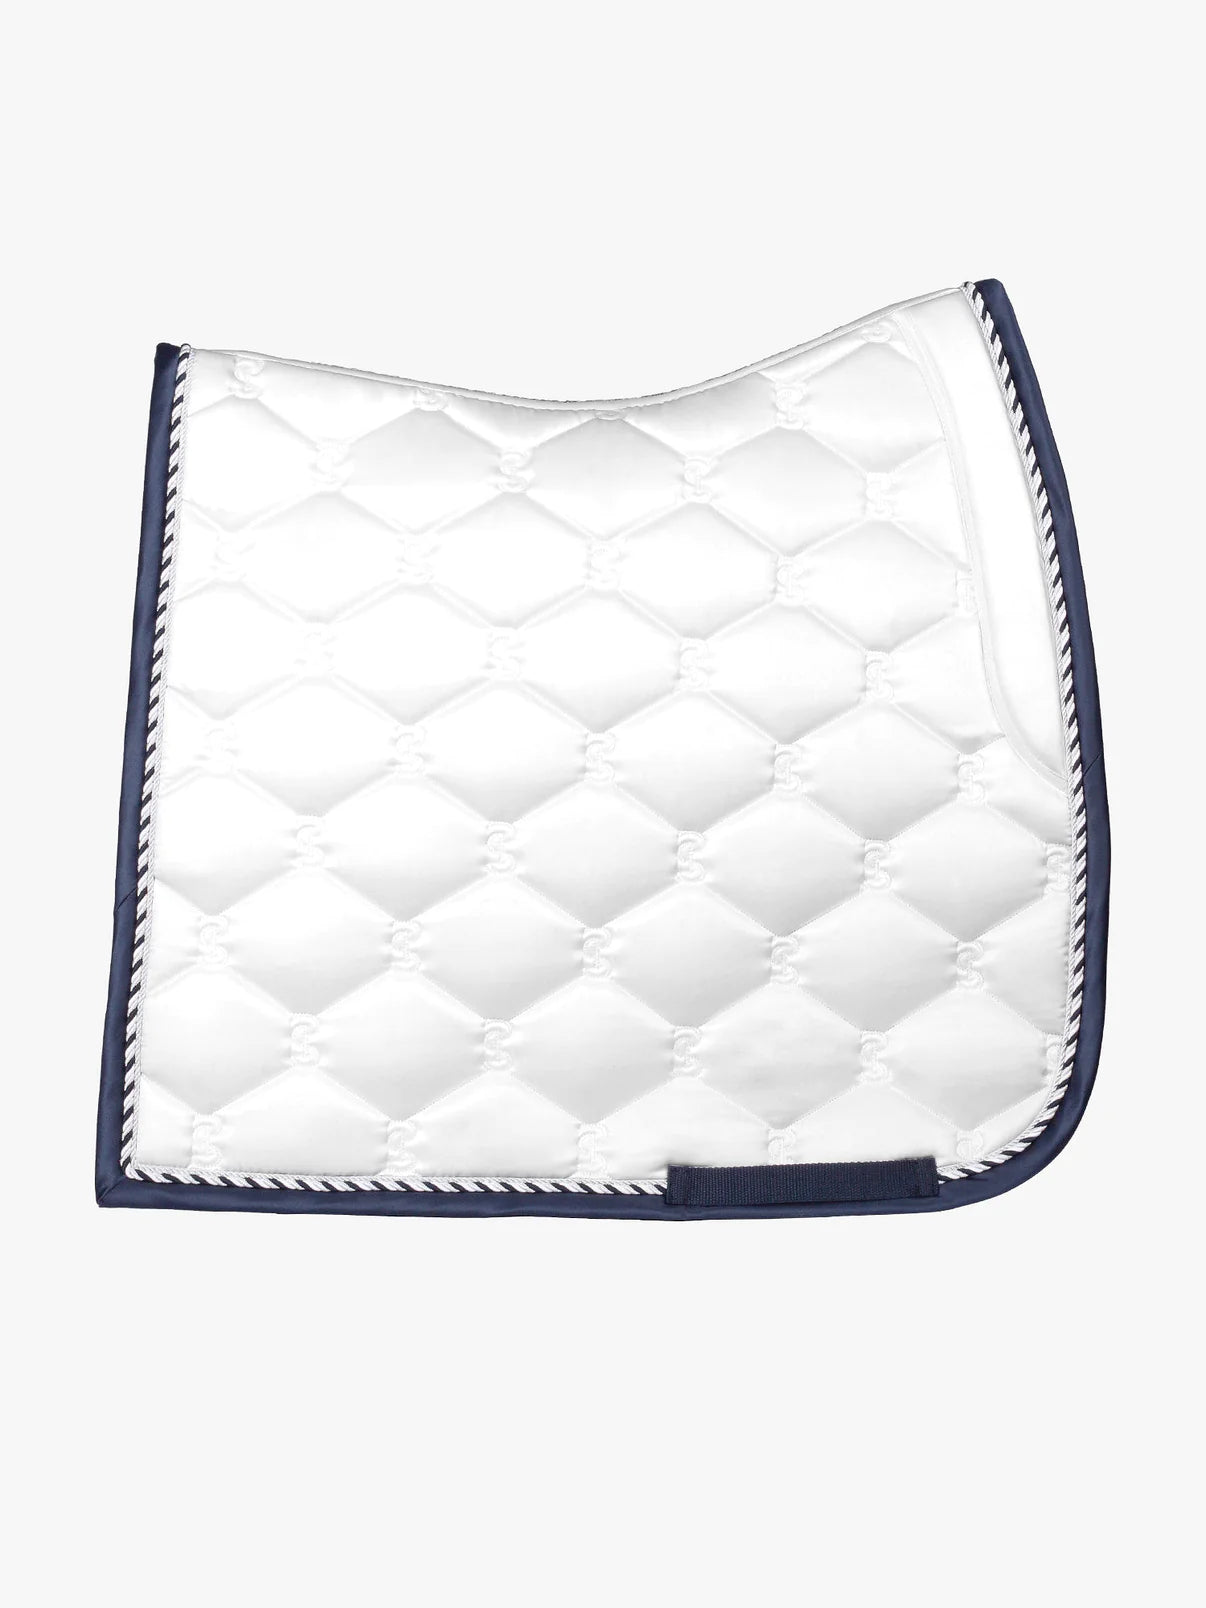 PS of Sweden Saddle Pad Signature White